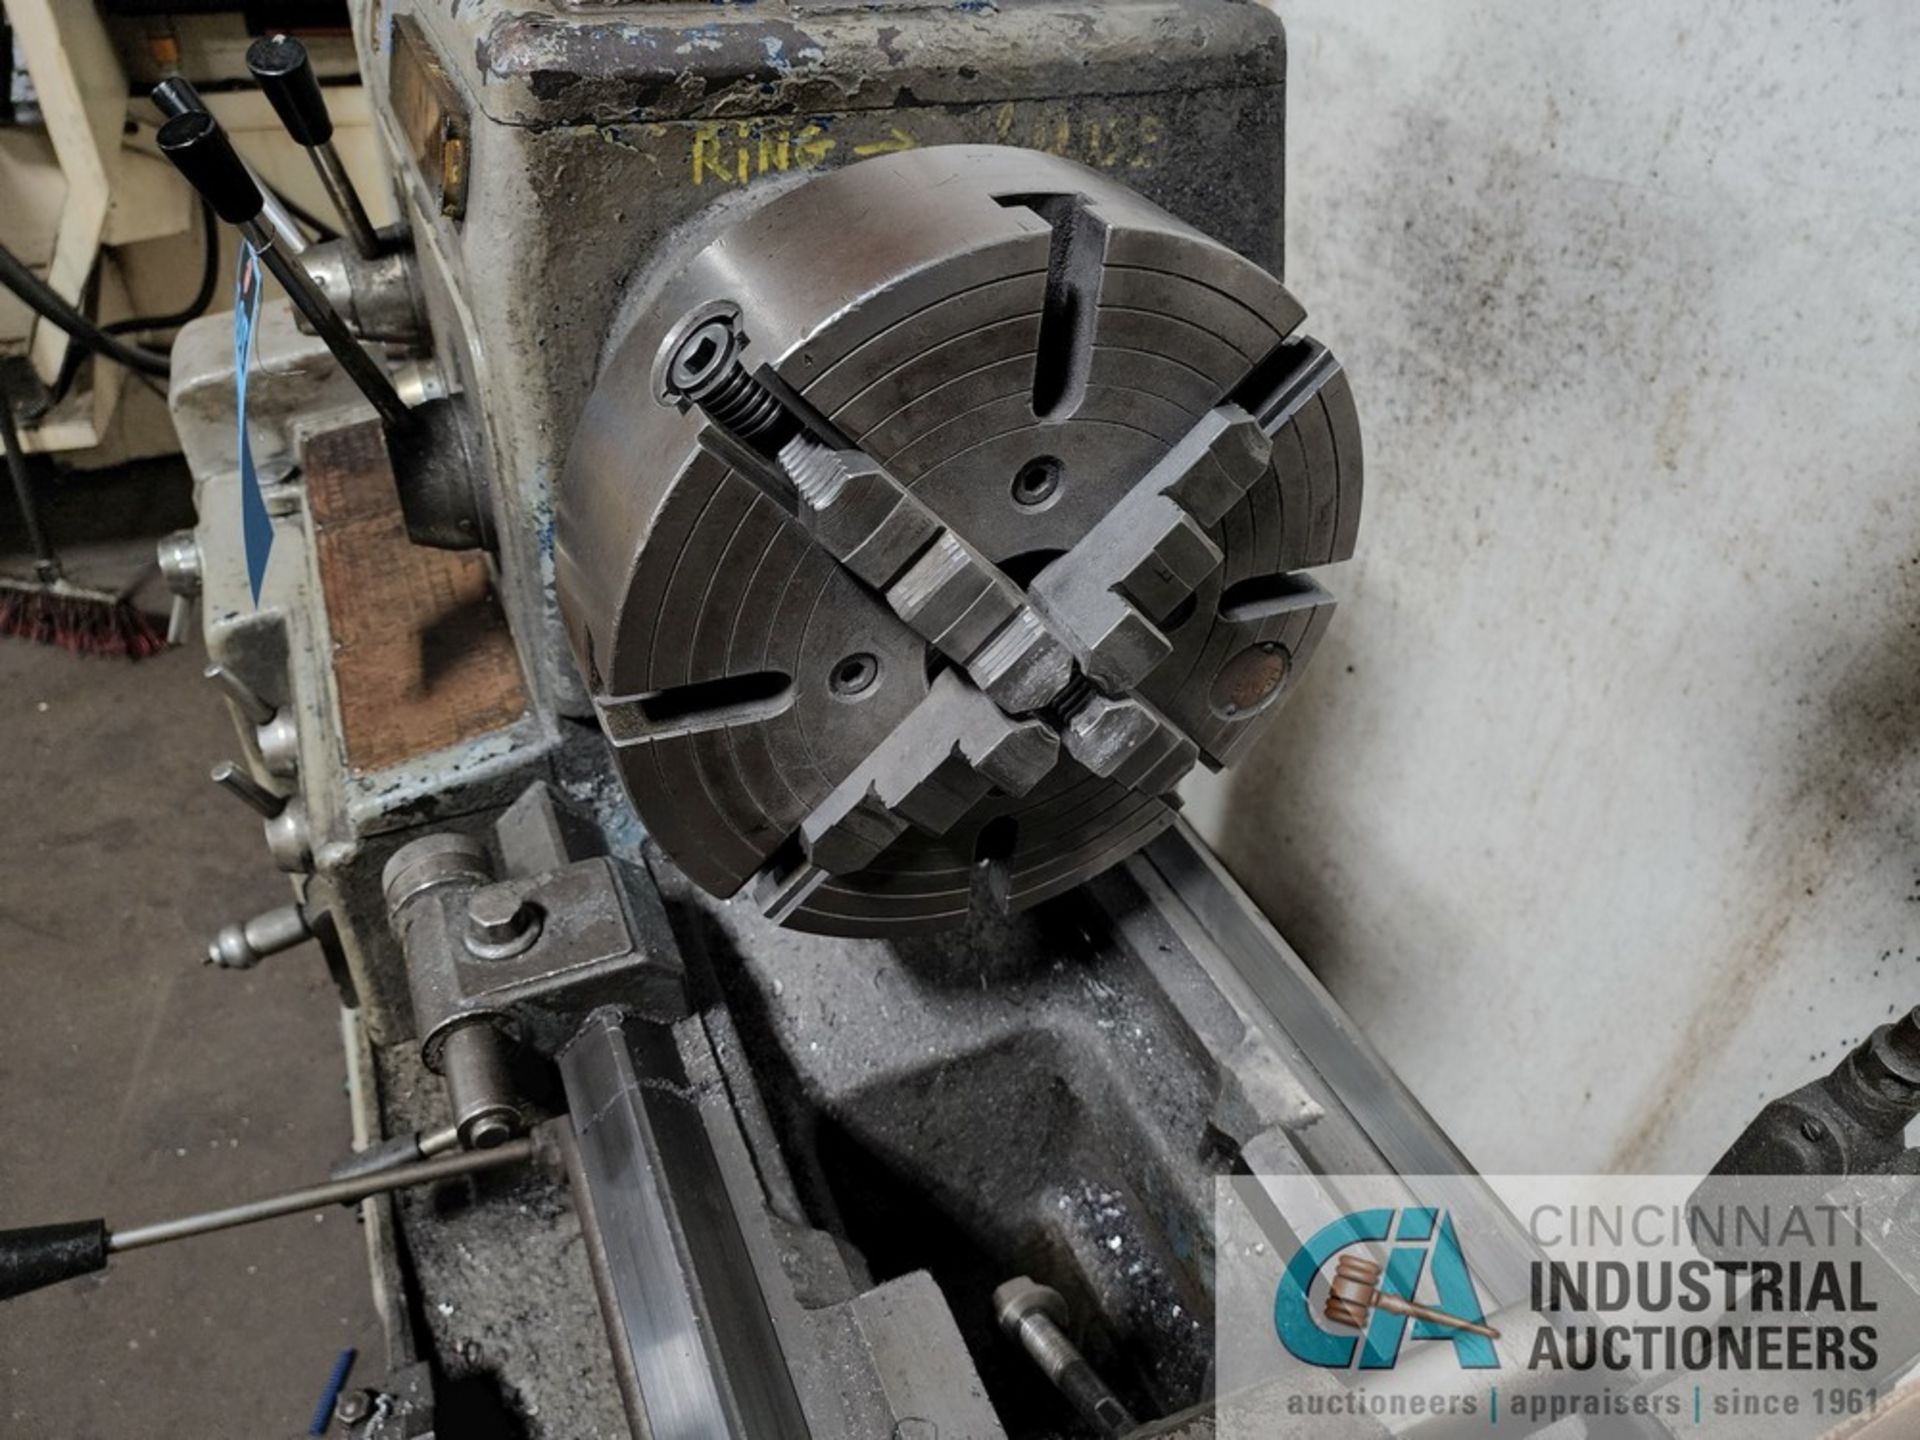 17" X 48" MORI-SEIKI TOOLROOM LATHE; S/N 693, 32 - 1,800 RPM, 12" 4-JAW CHUCK, 2" SPINDLE HOLE, - Image 6 of 7